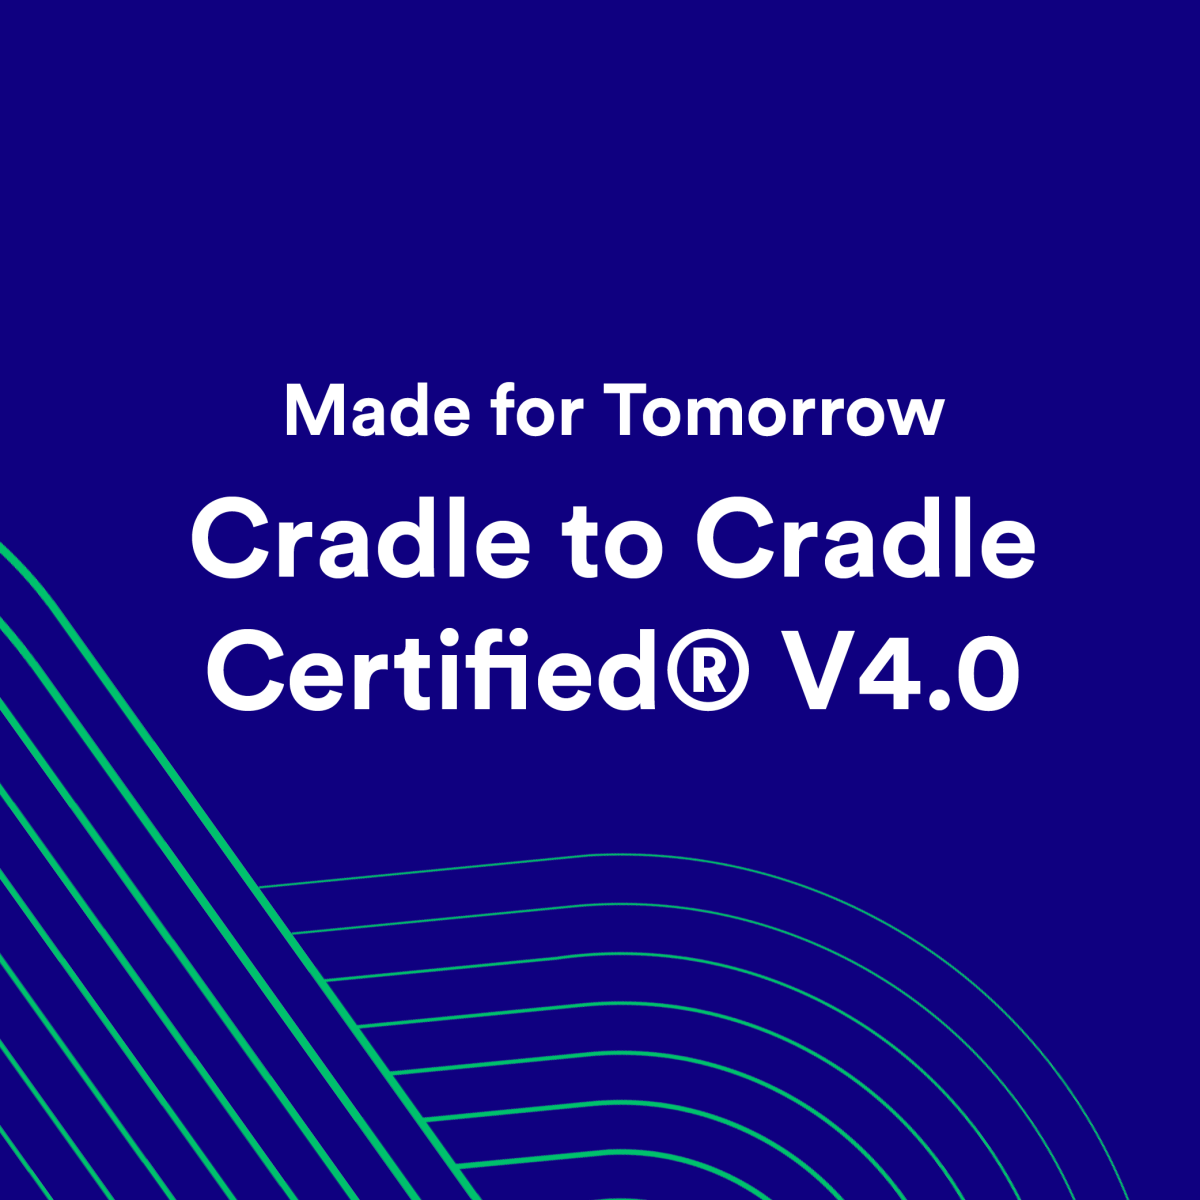 Cradle to Cradle Certified® Product Standard Version 4.0 is here